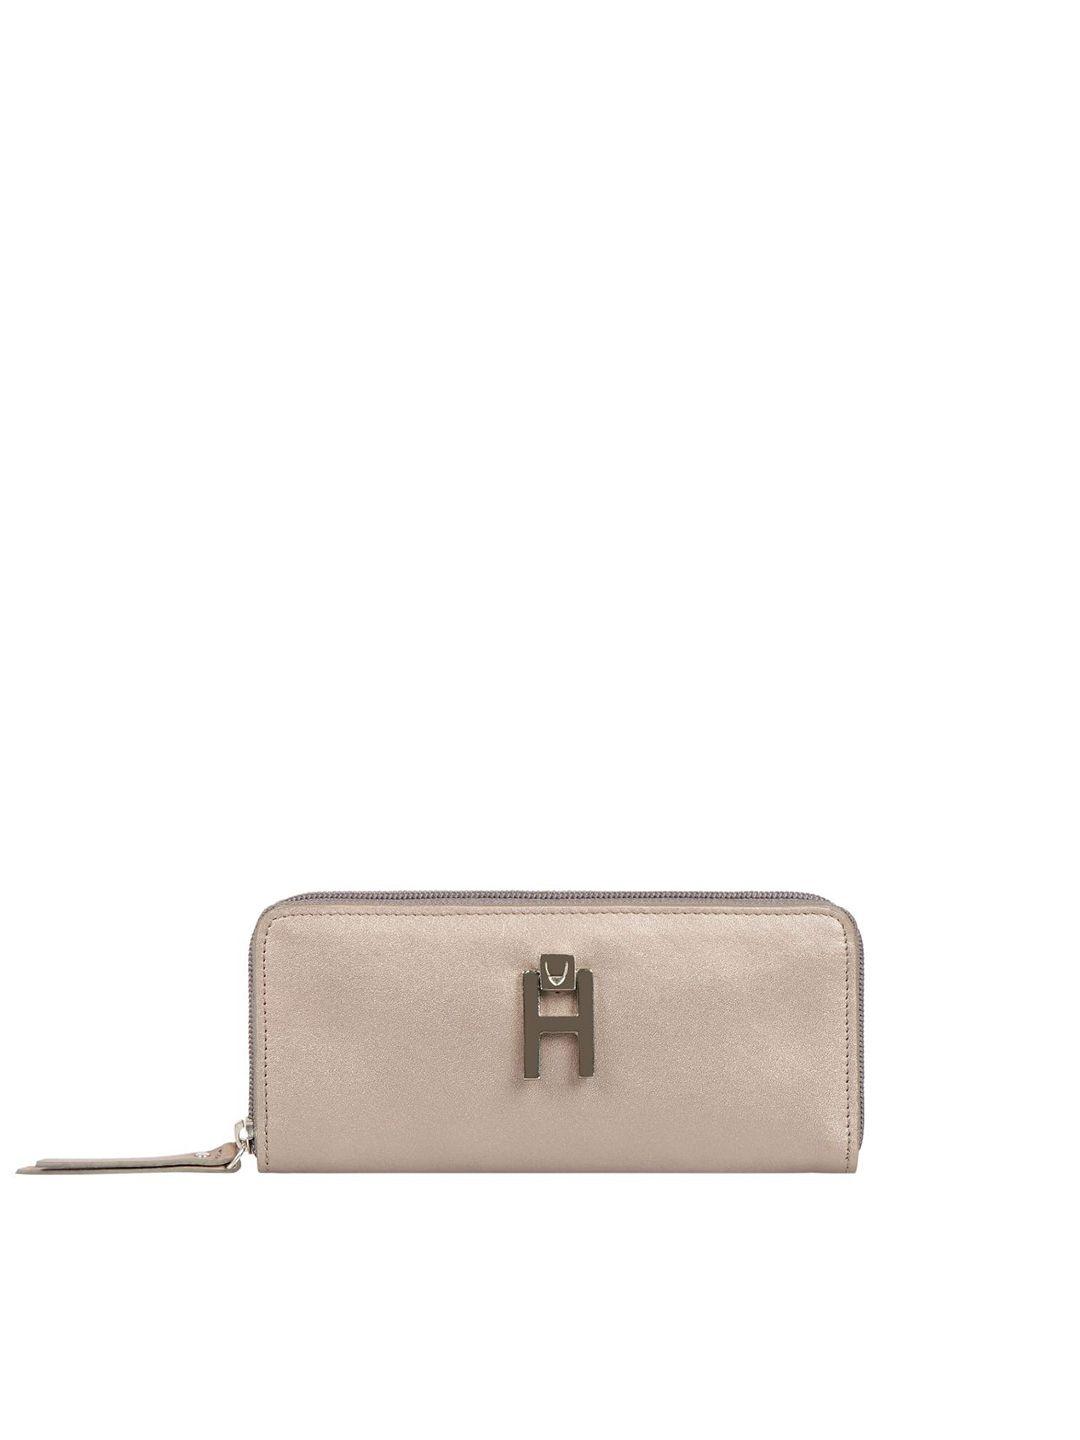 hidesign-taupe-solid-purse-clutch